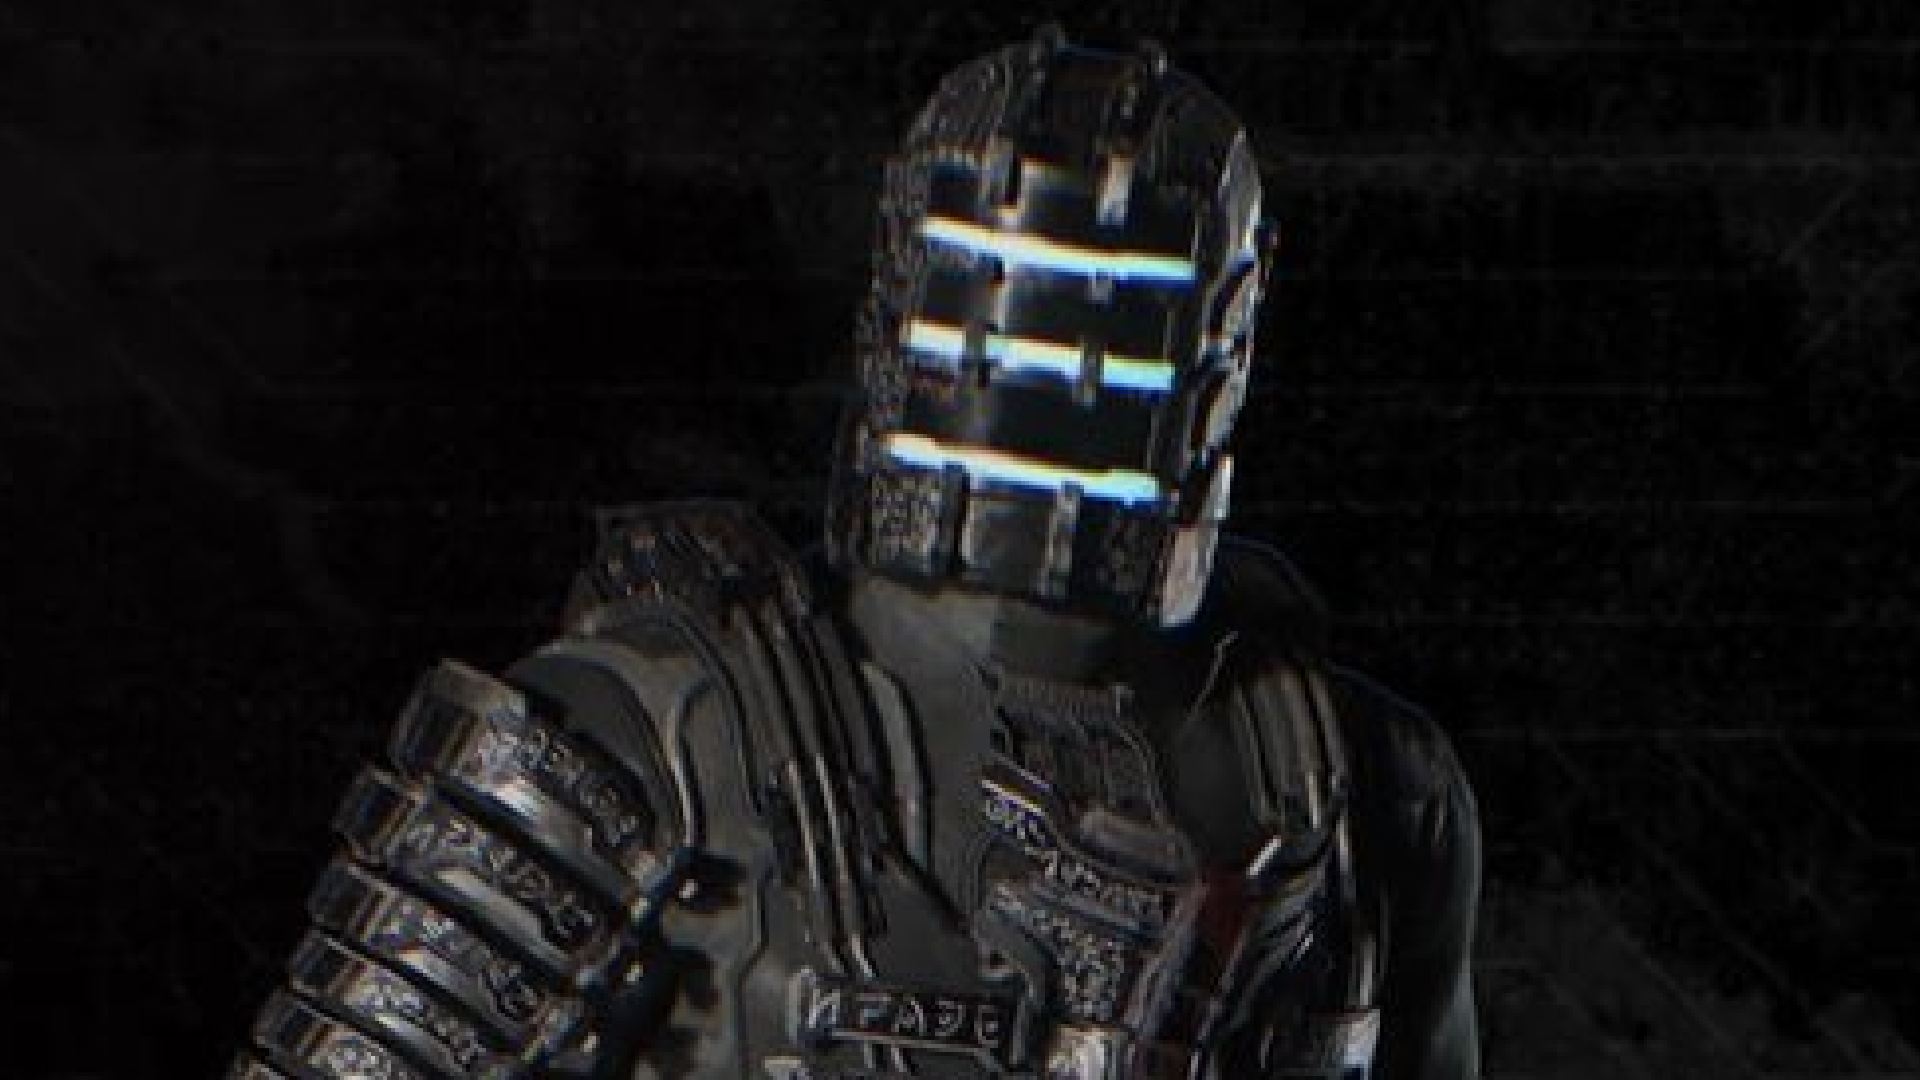 Dead Space remake: all suit upgrades, locations, and unlock conditions -  Video Games on Sports Illustrated